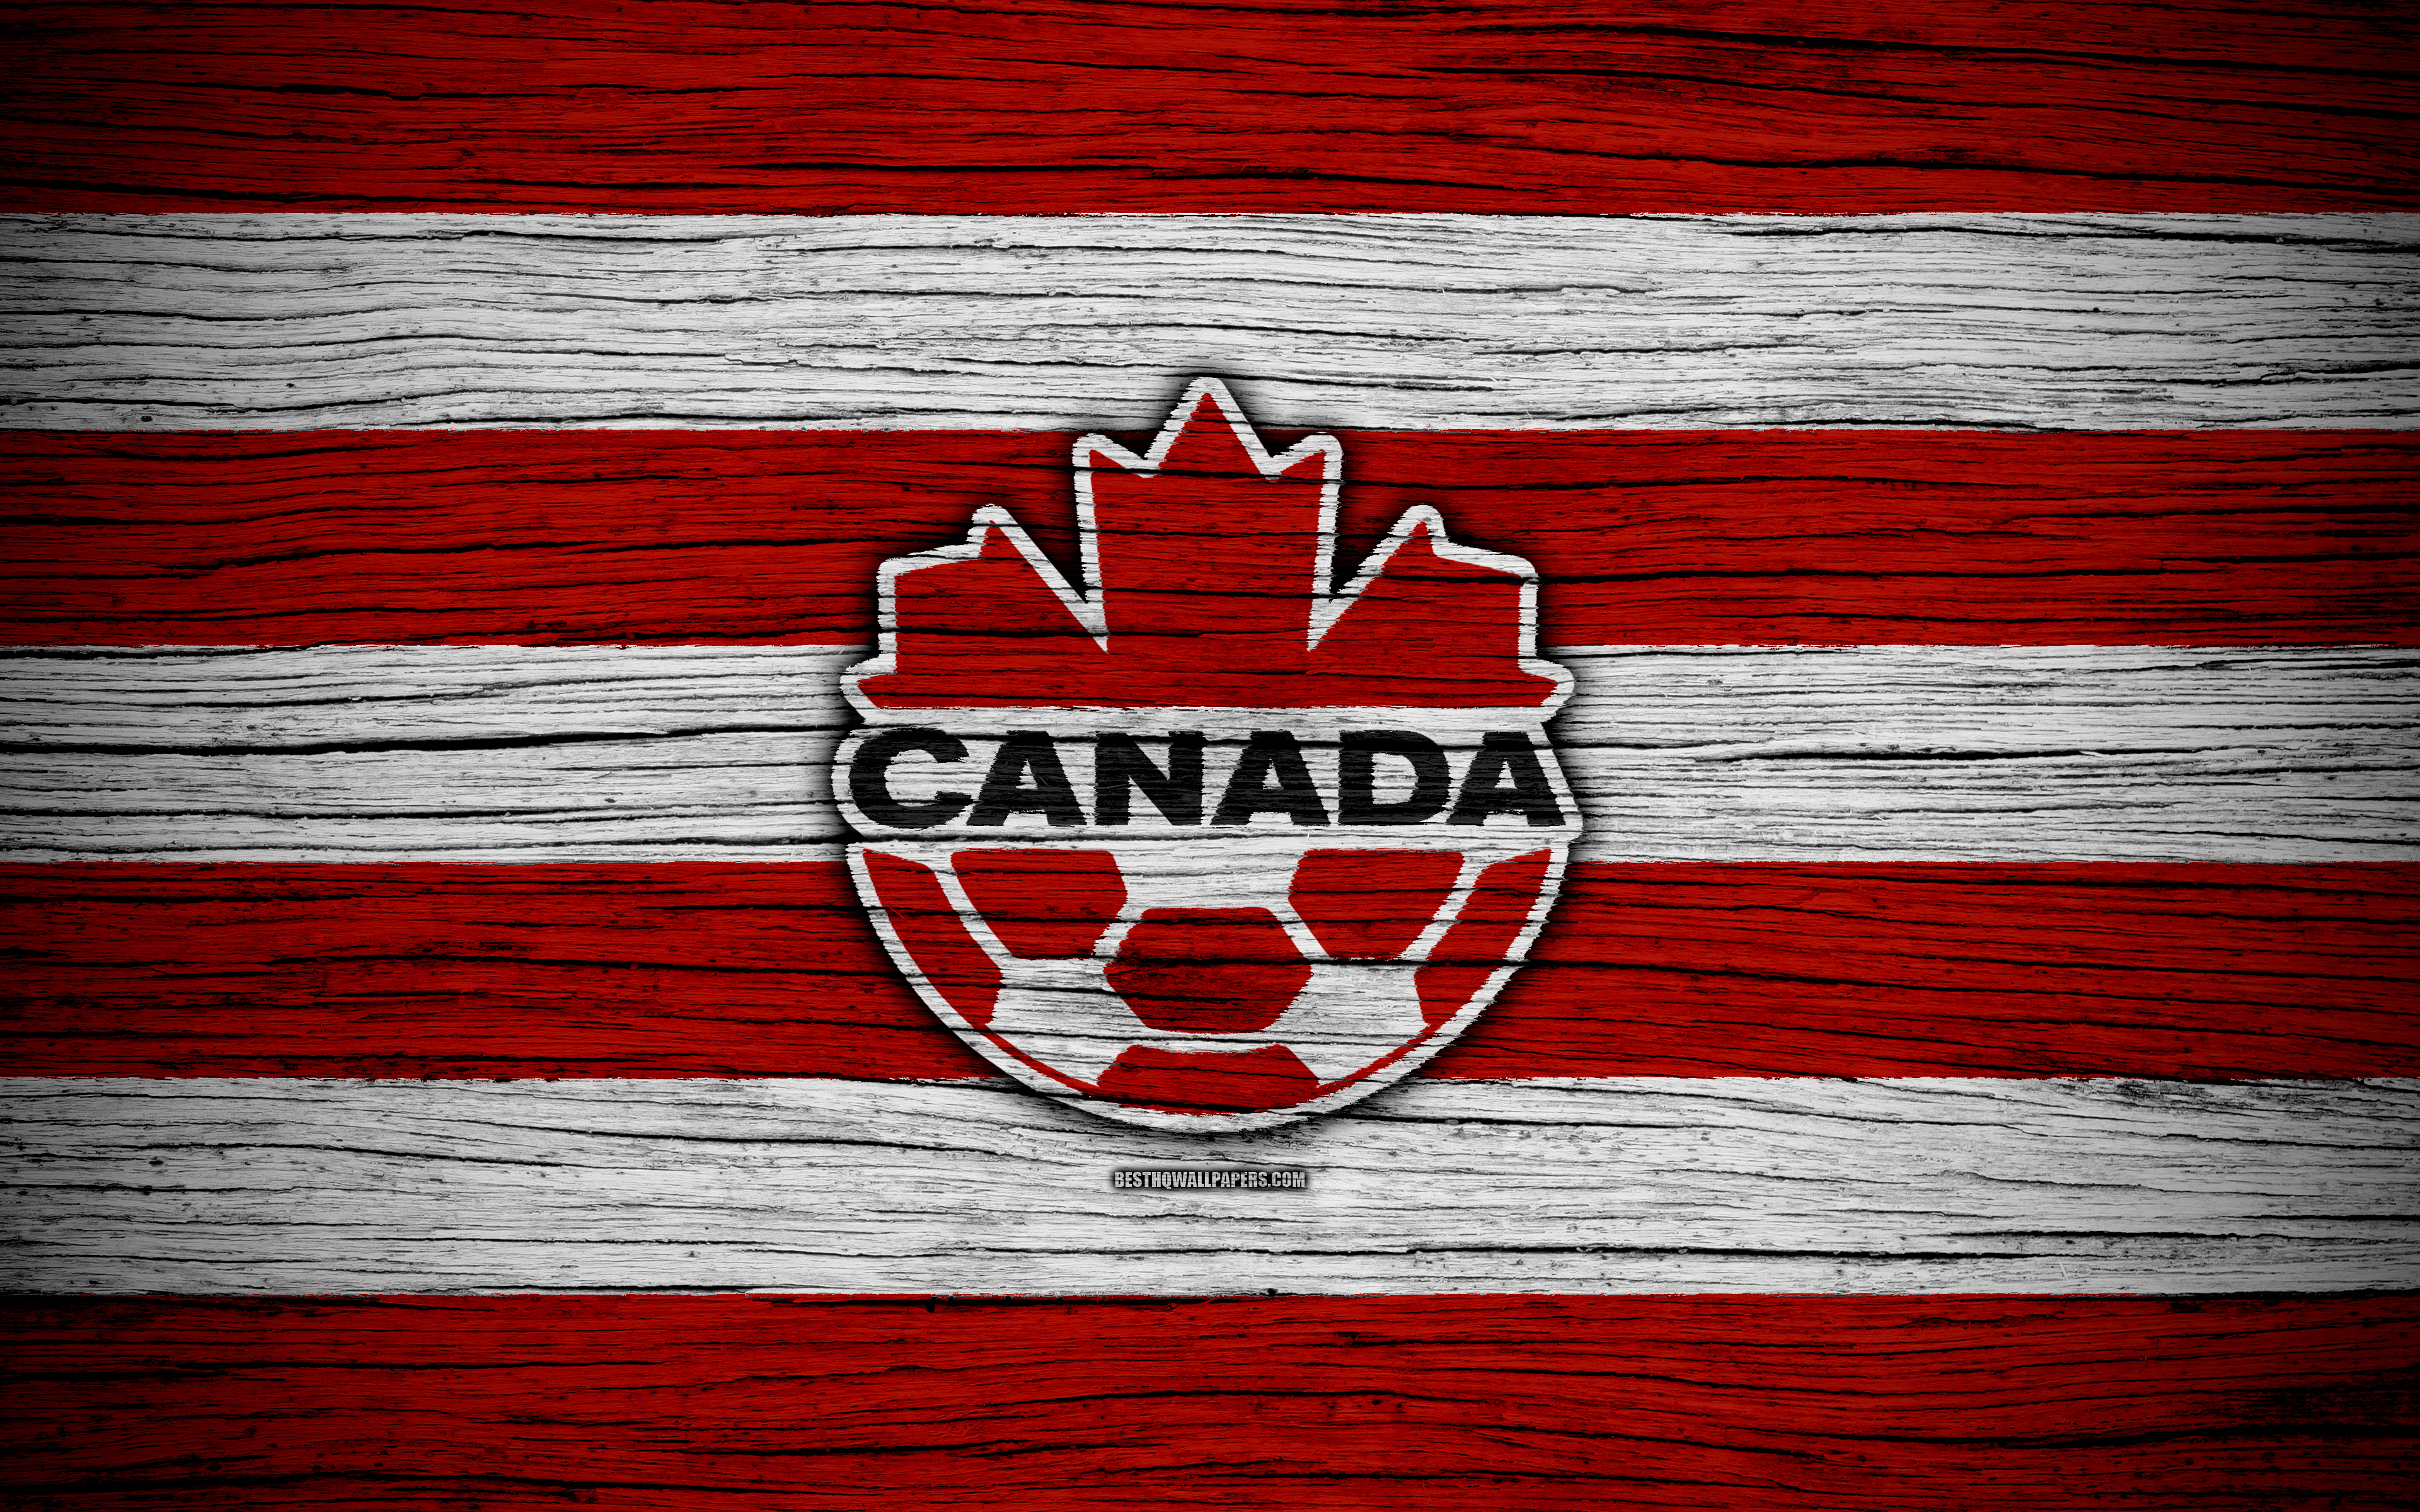 Download wallpaper 4k, Canada national football team, logo, North America, football, wooden texture, soccer, Costa Rica, emblem, North American national teams, Canadian football team for desktop with resolution 3840x2400. High Quality HD